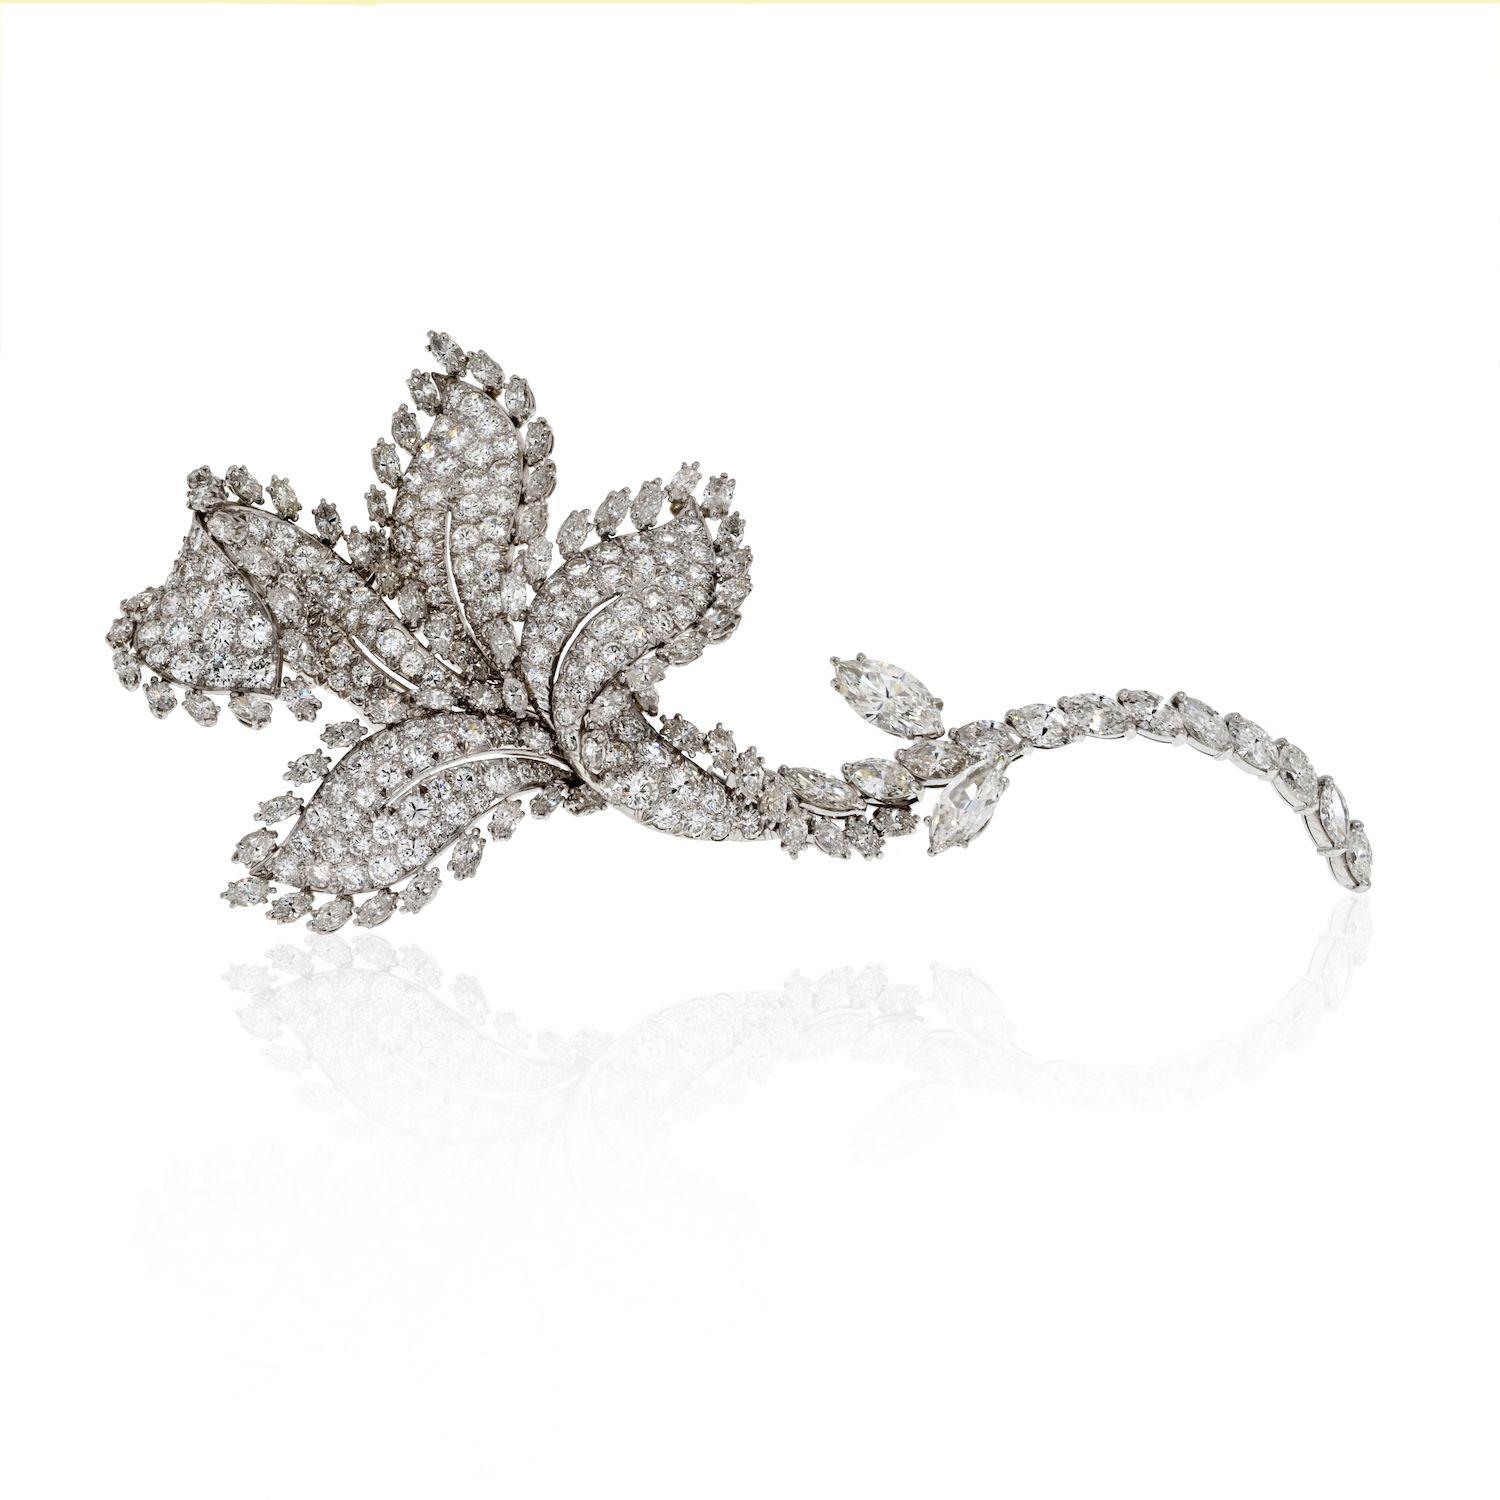 Absolutely stunning diamond brooch by David Webb crafted in platinum mounted with 271 diamonds of round and marquise shapes. 
An original one-of-a-kind vintage David Webb design. Classic materials come together to form this fabulous diamond, 